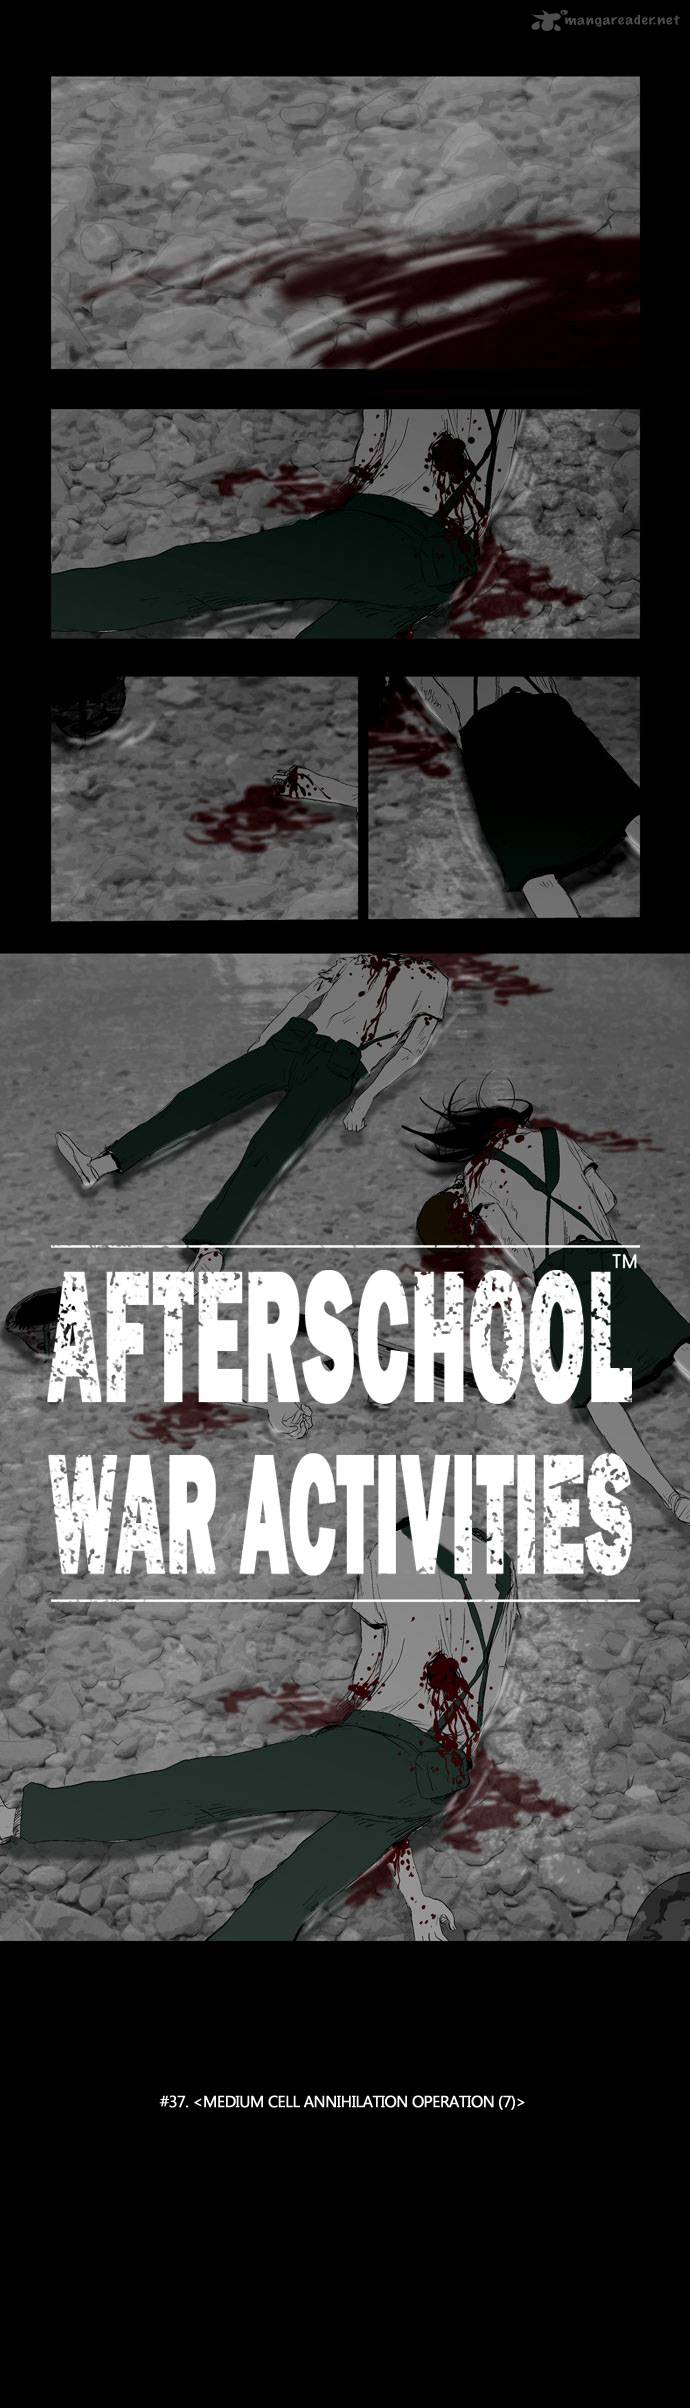 afterschool_military_activity_37_4